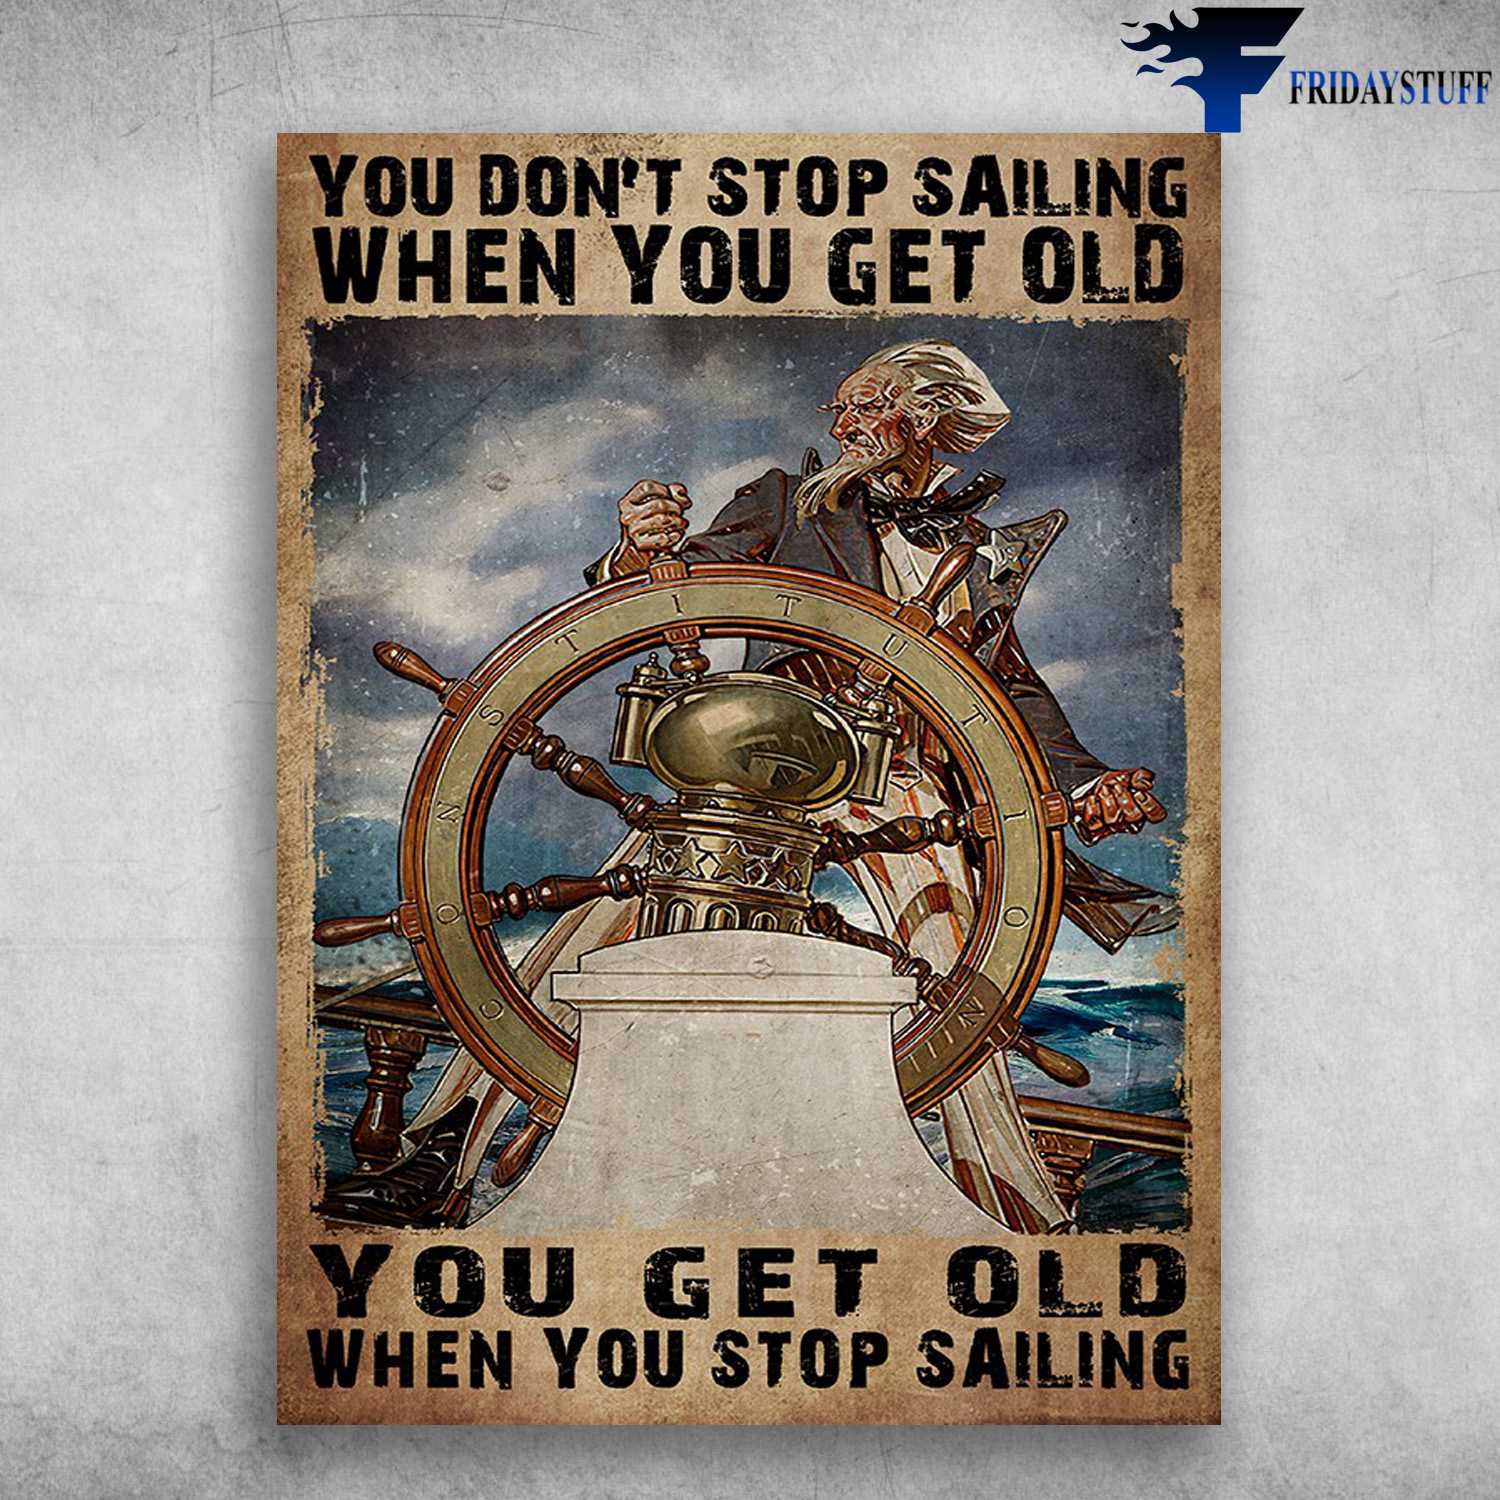 Sailor On The Sea, Old Sailor - You Don't Stop Sailing When You Get Old, You Get Old When You Stop Sailing